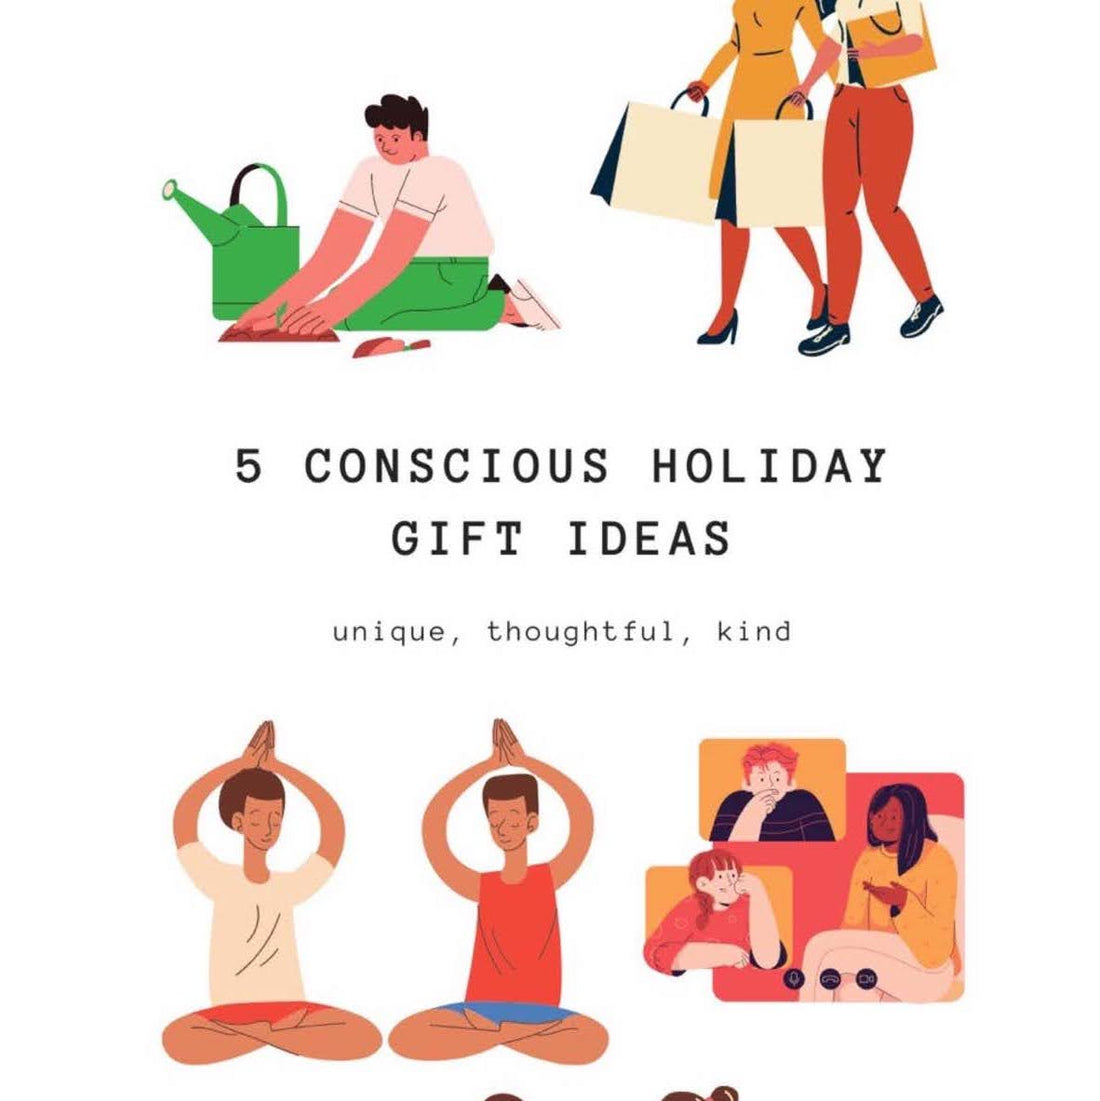 5 conscious holiday gift ideas